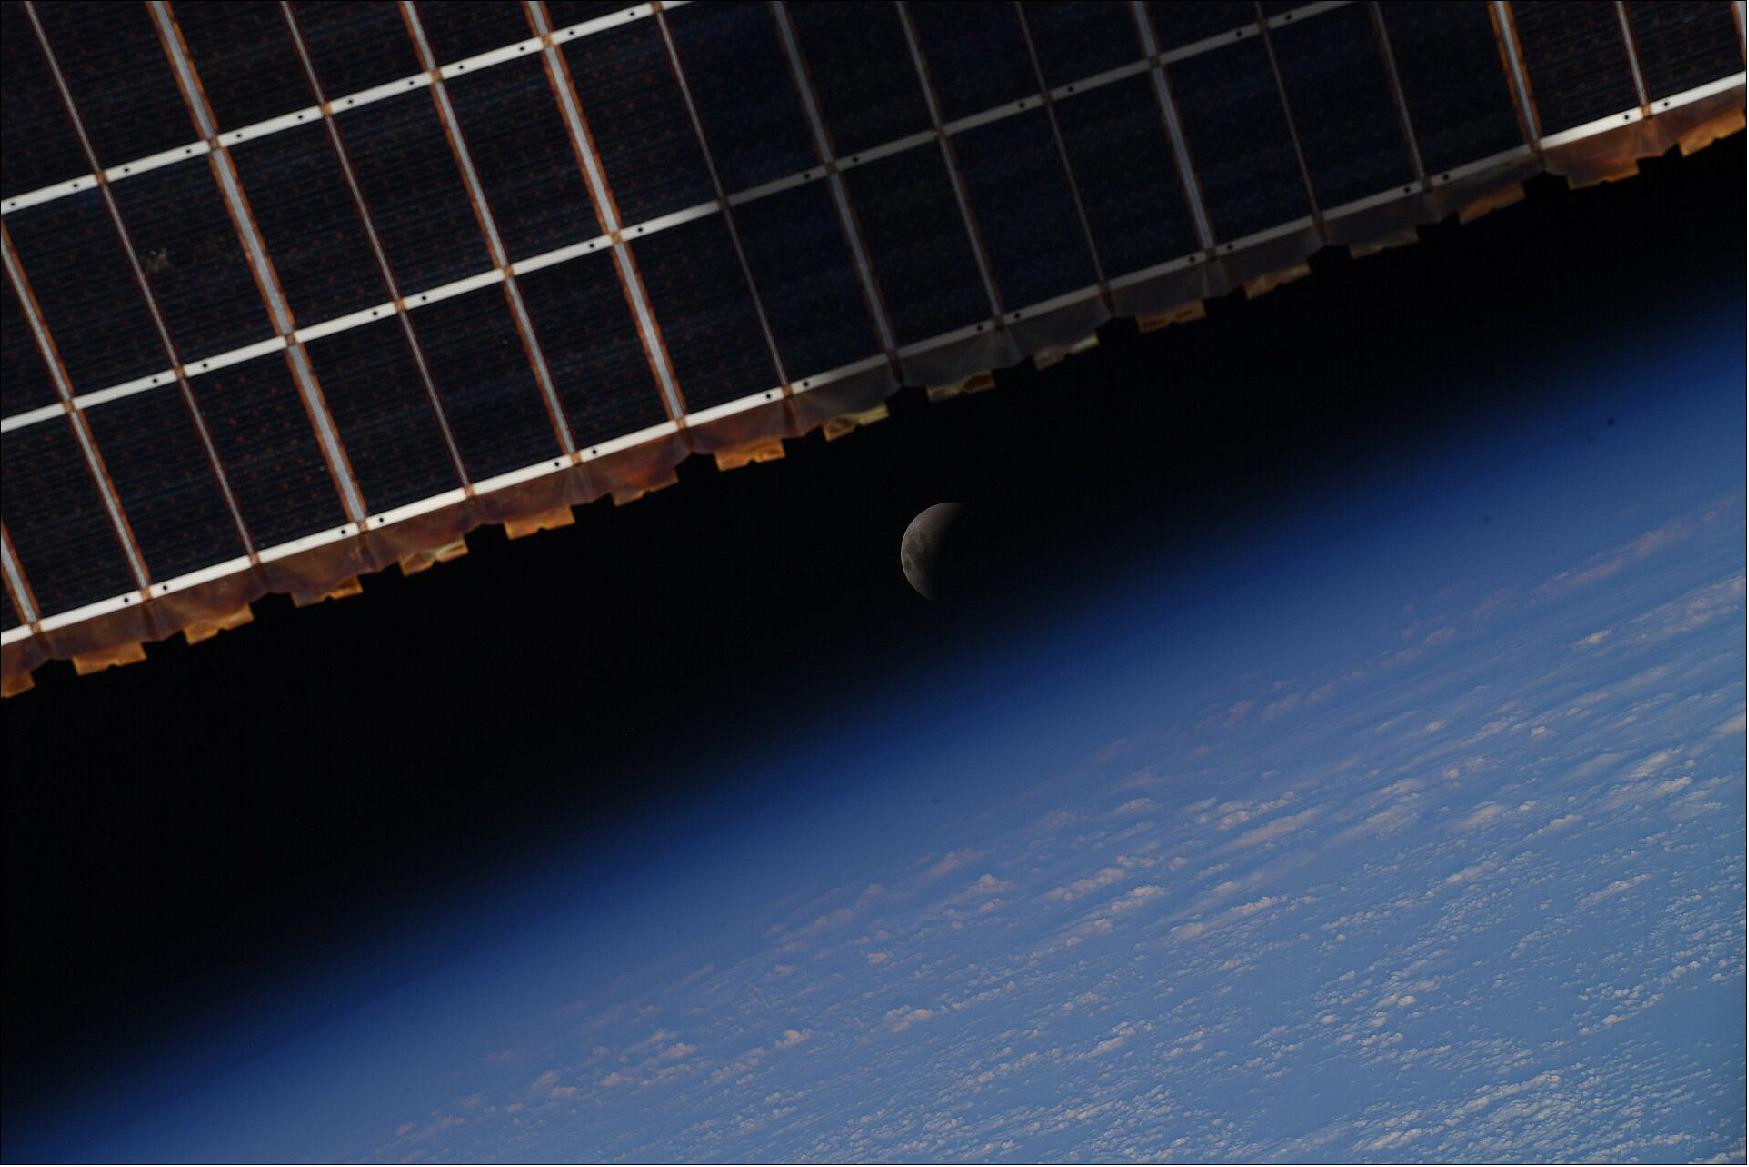 Figure 20: Lunar eclipse captured by Samantha Cristoforetti aboard the ISS — with Earth’s shadow draping across it during a lunar eclipse (image credit: ESA astronaut Samantha)